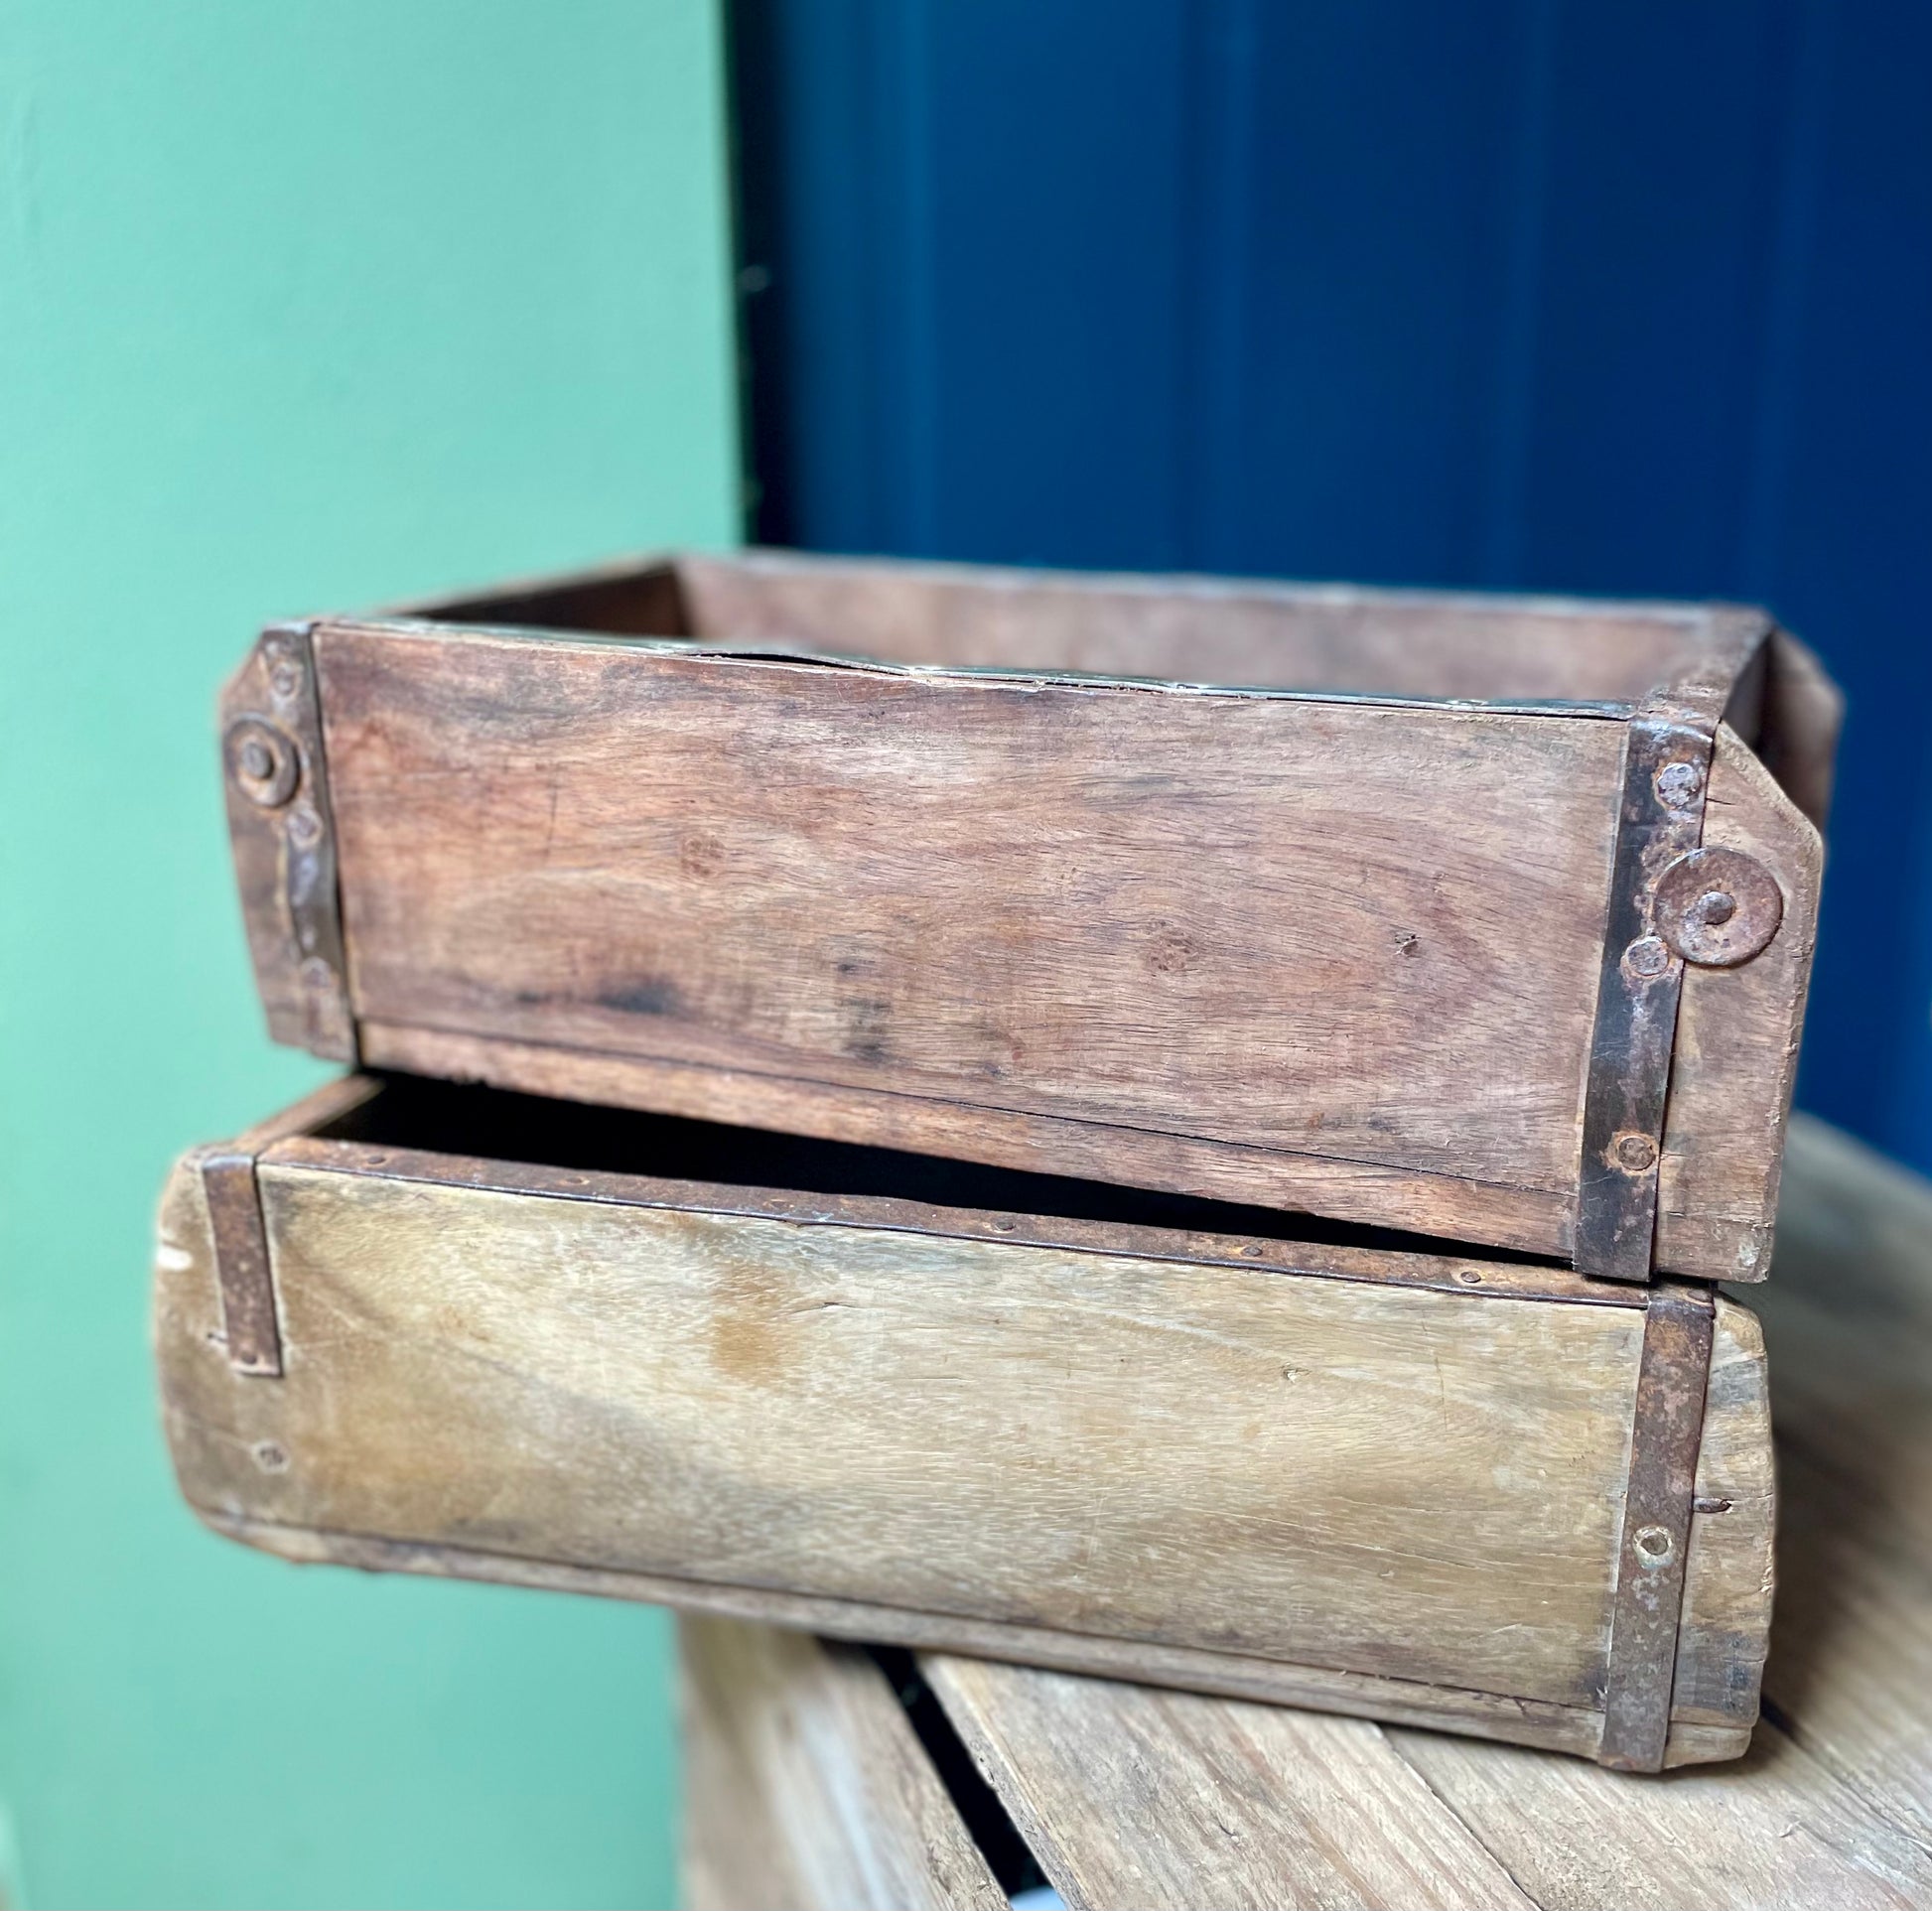 Recycled Indian Brick Mould Container - The Bristol Artisan Handmade Sustainable Gifts and Homewares.